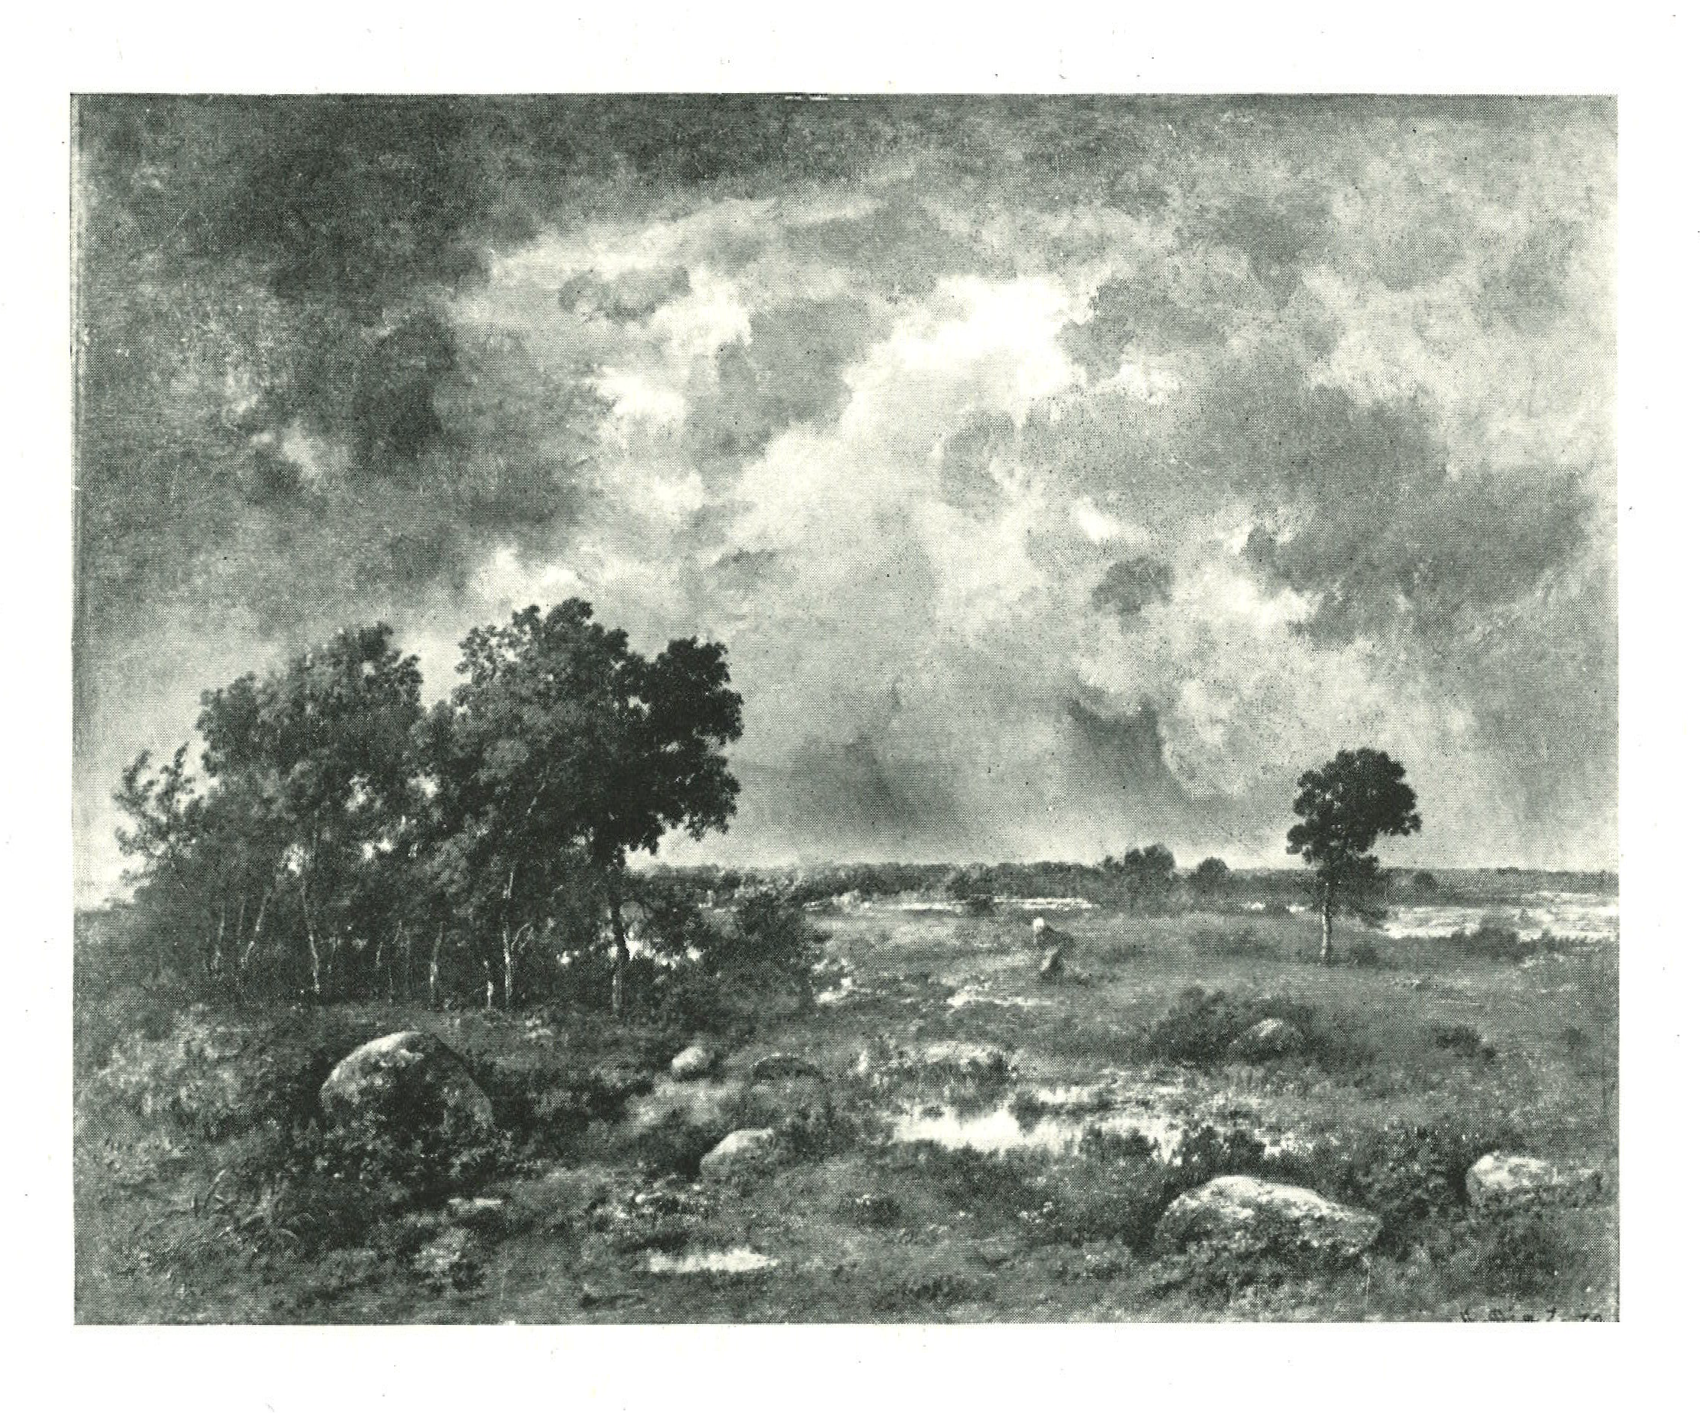 An image of a large field with trees scattered across it. To the right is a small pound which reflects the cloudy sky above.